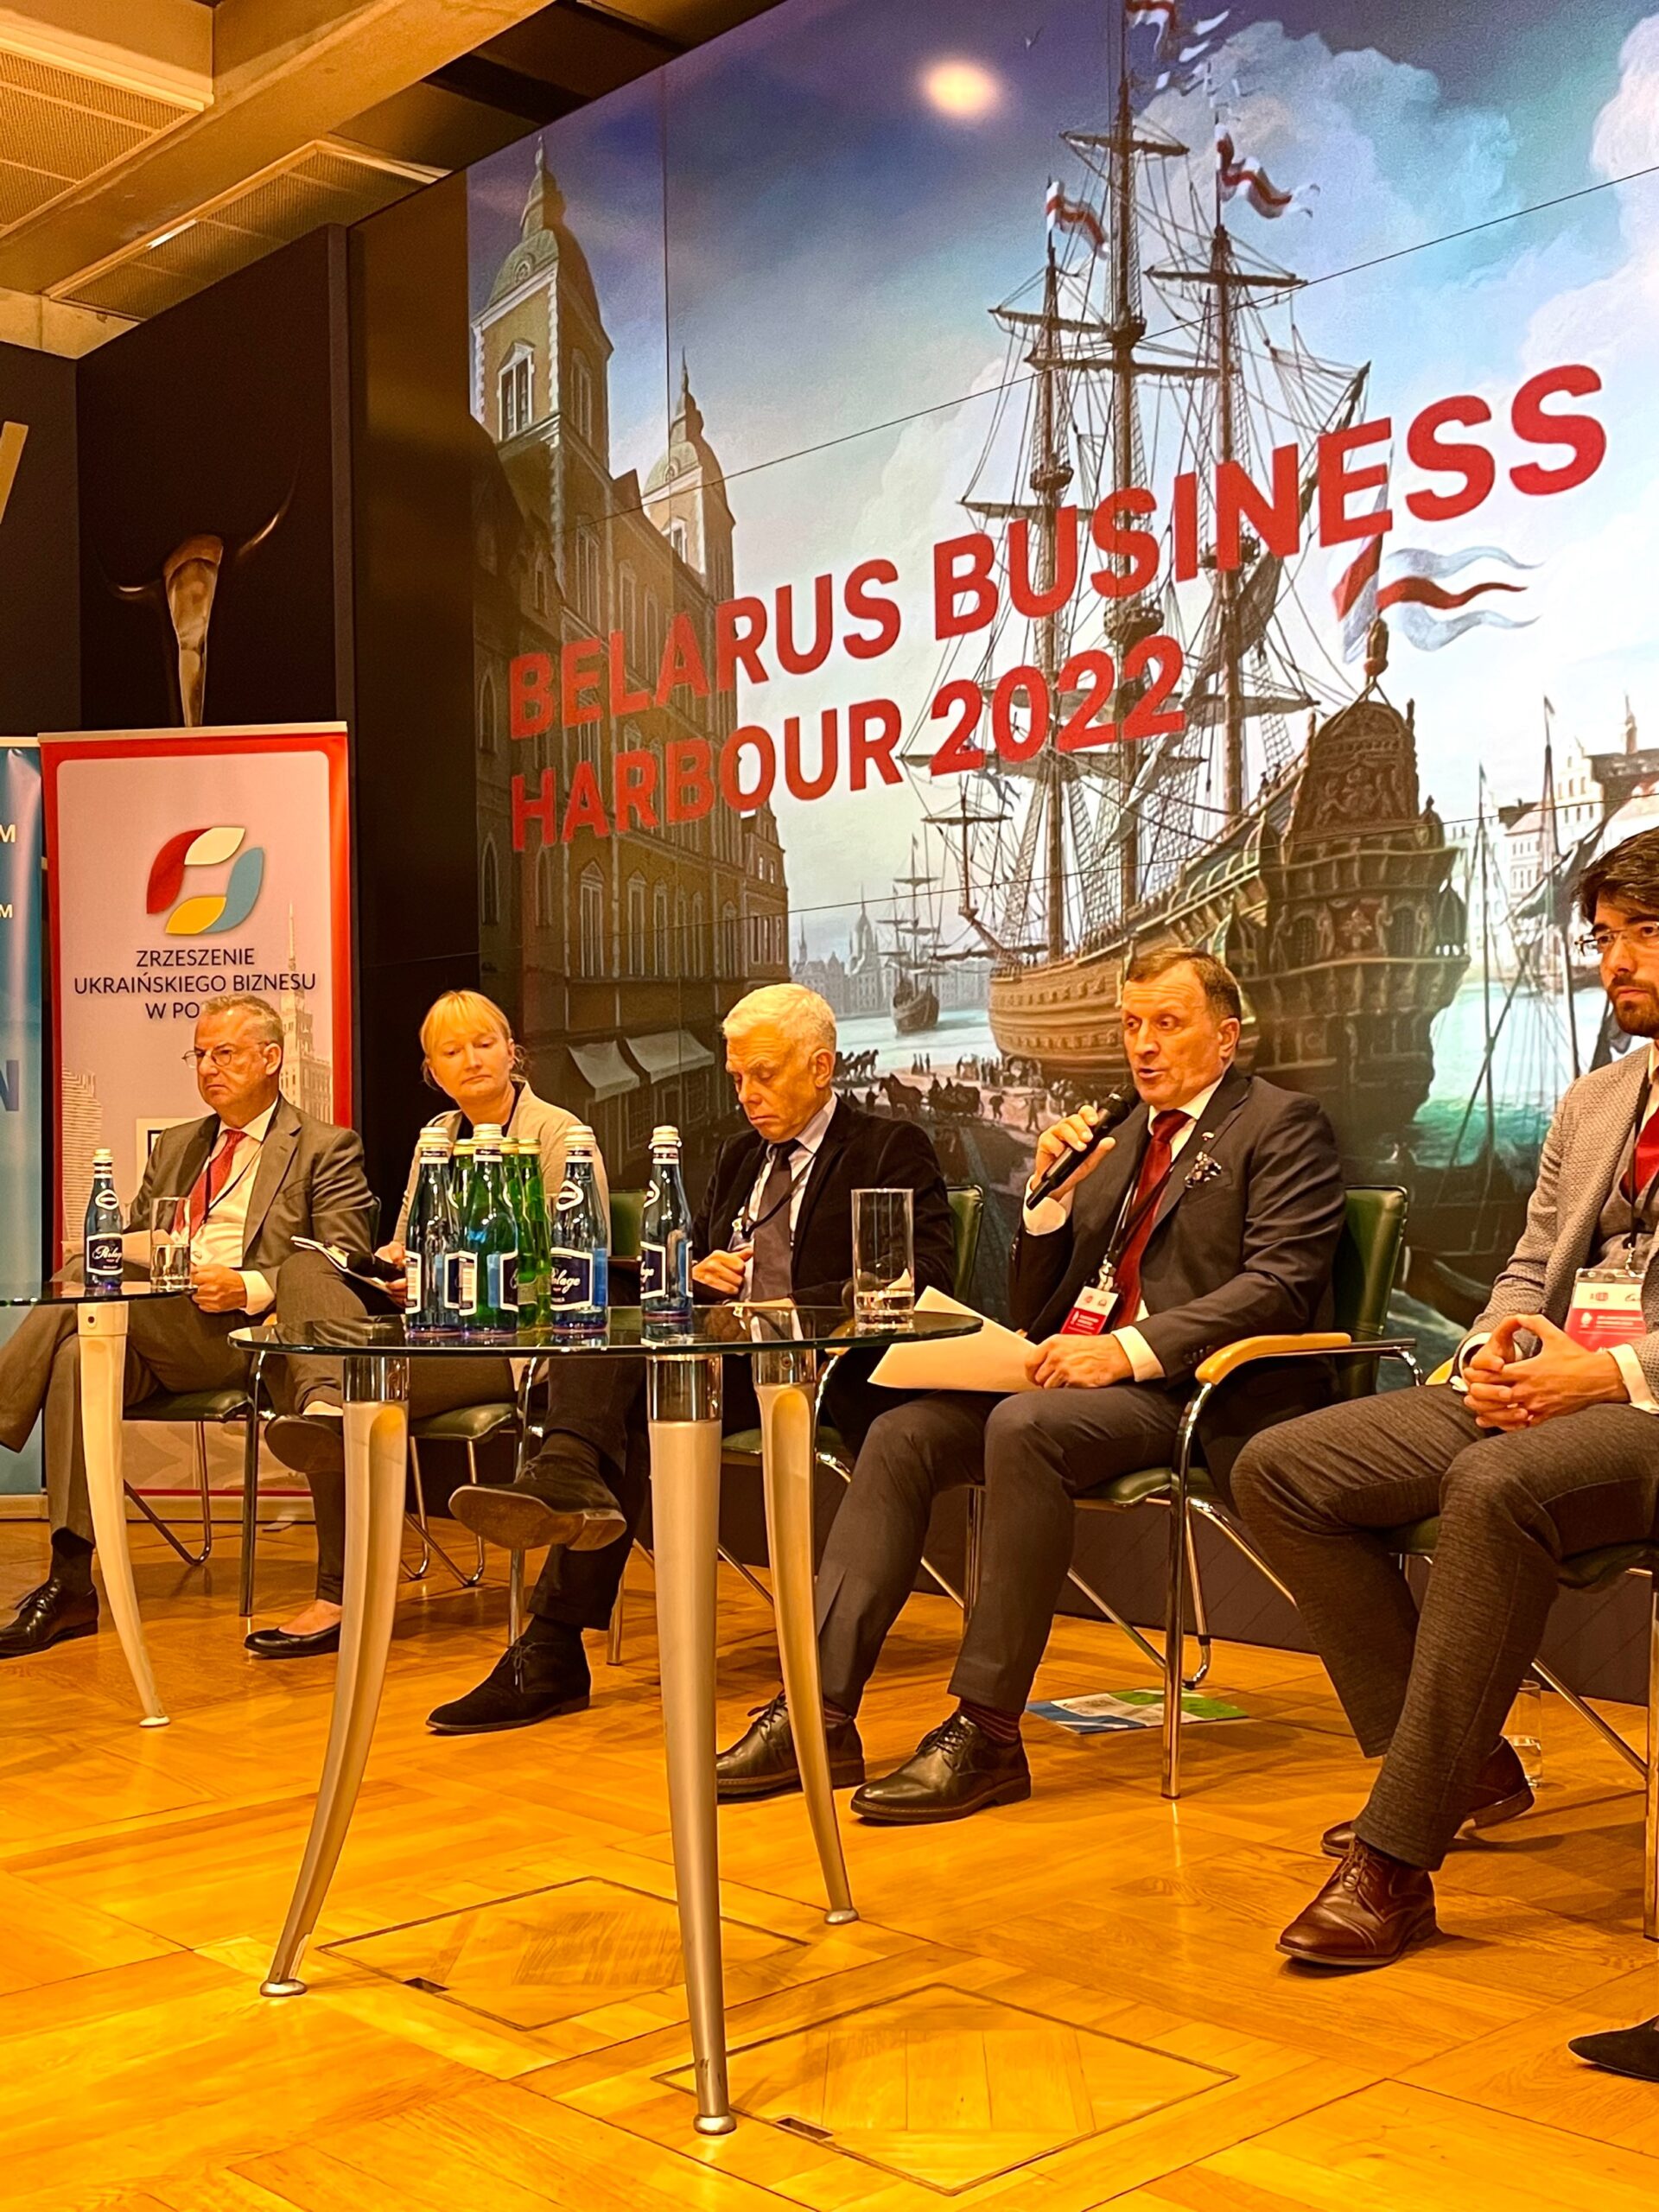 STEP BY STEP: THE BELARUS BUSINESS HARBOR 2022 FORUM WAS HELD IN WARSAW ON SEPTEMBER 19, AT WHICH YAROSLAV ROMANCHUK AND ANDRII ROMANCHUK SPEAKS